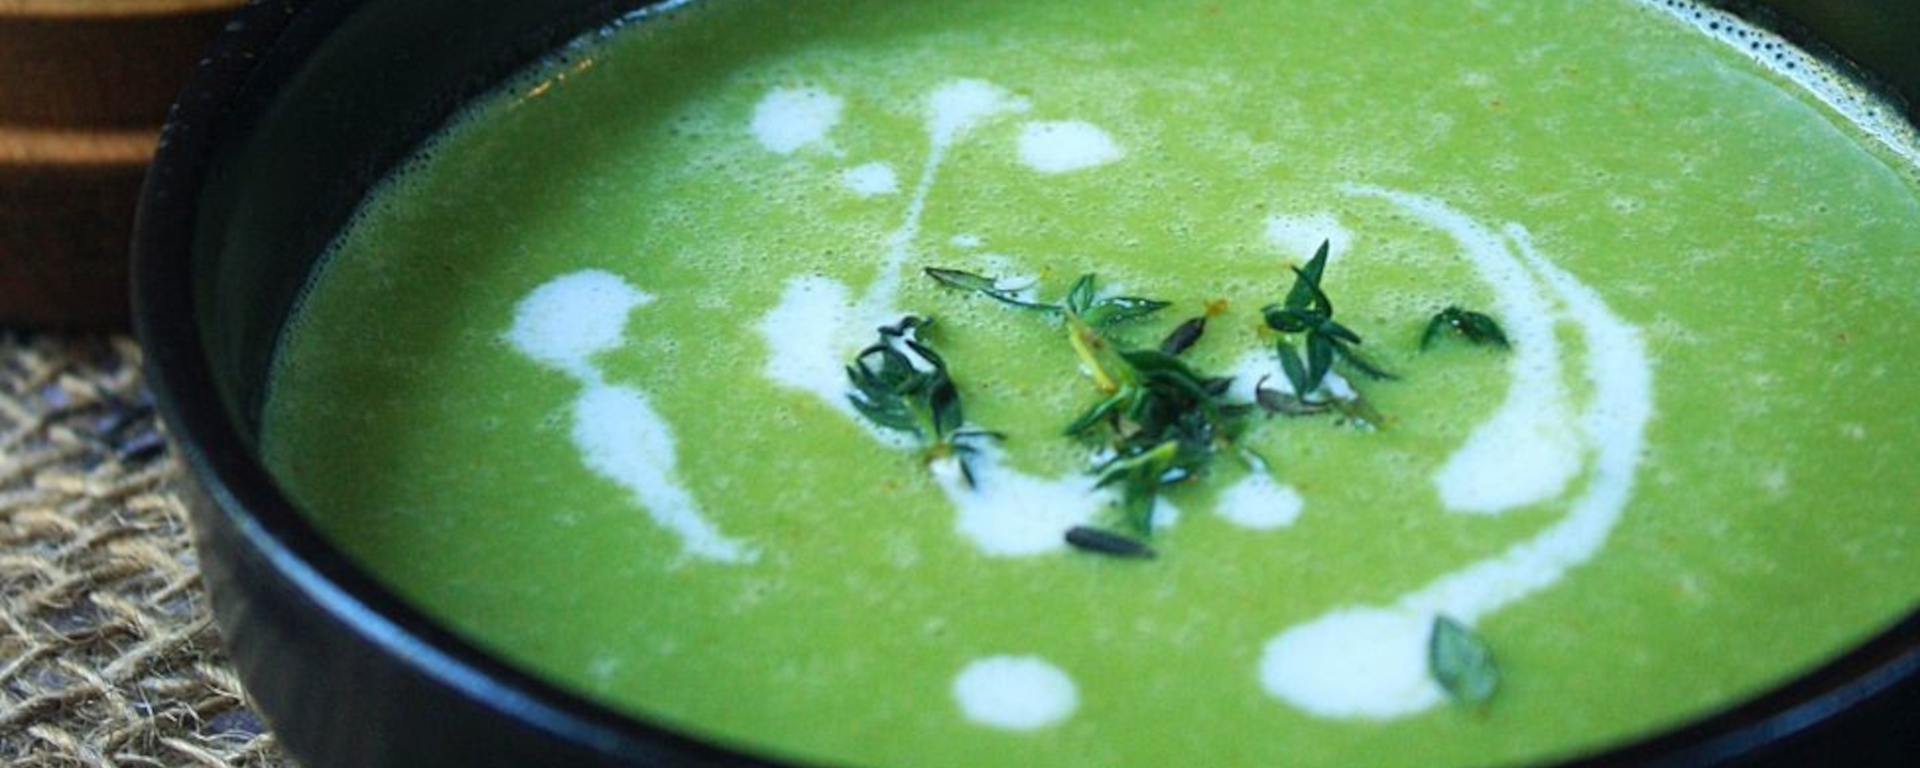 LuvMyRecipe.com - Chilled Green Pea and Onion Soup Featured